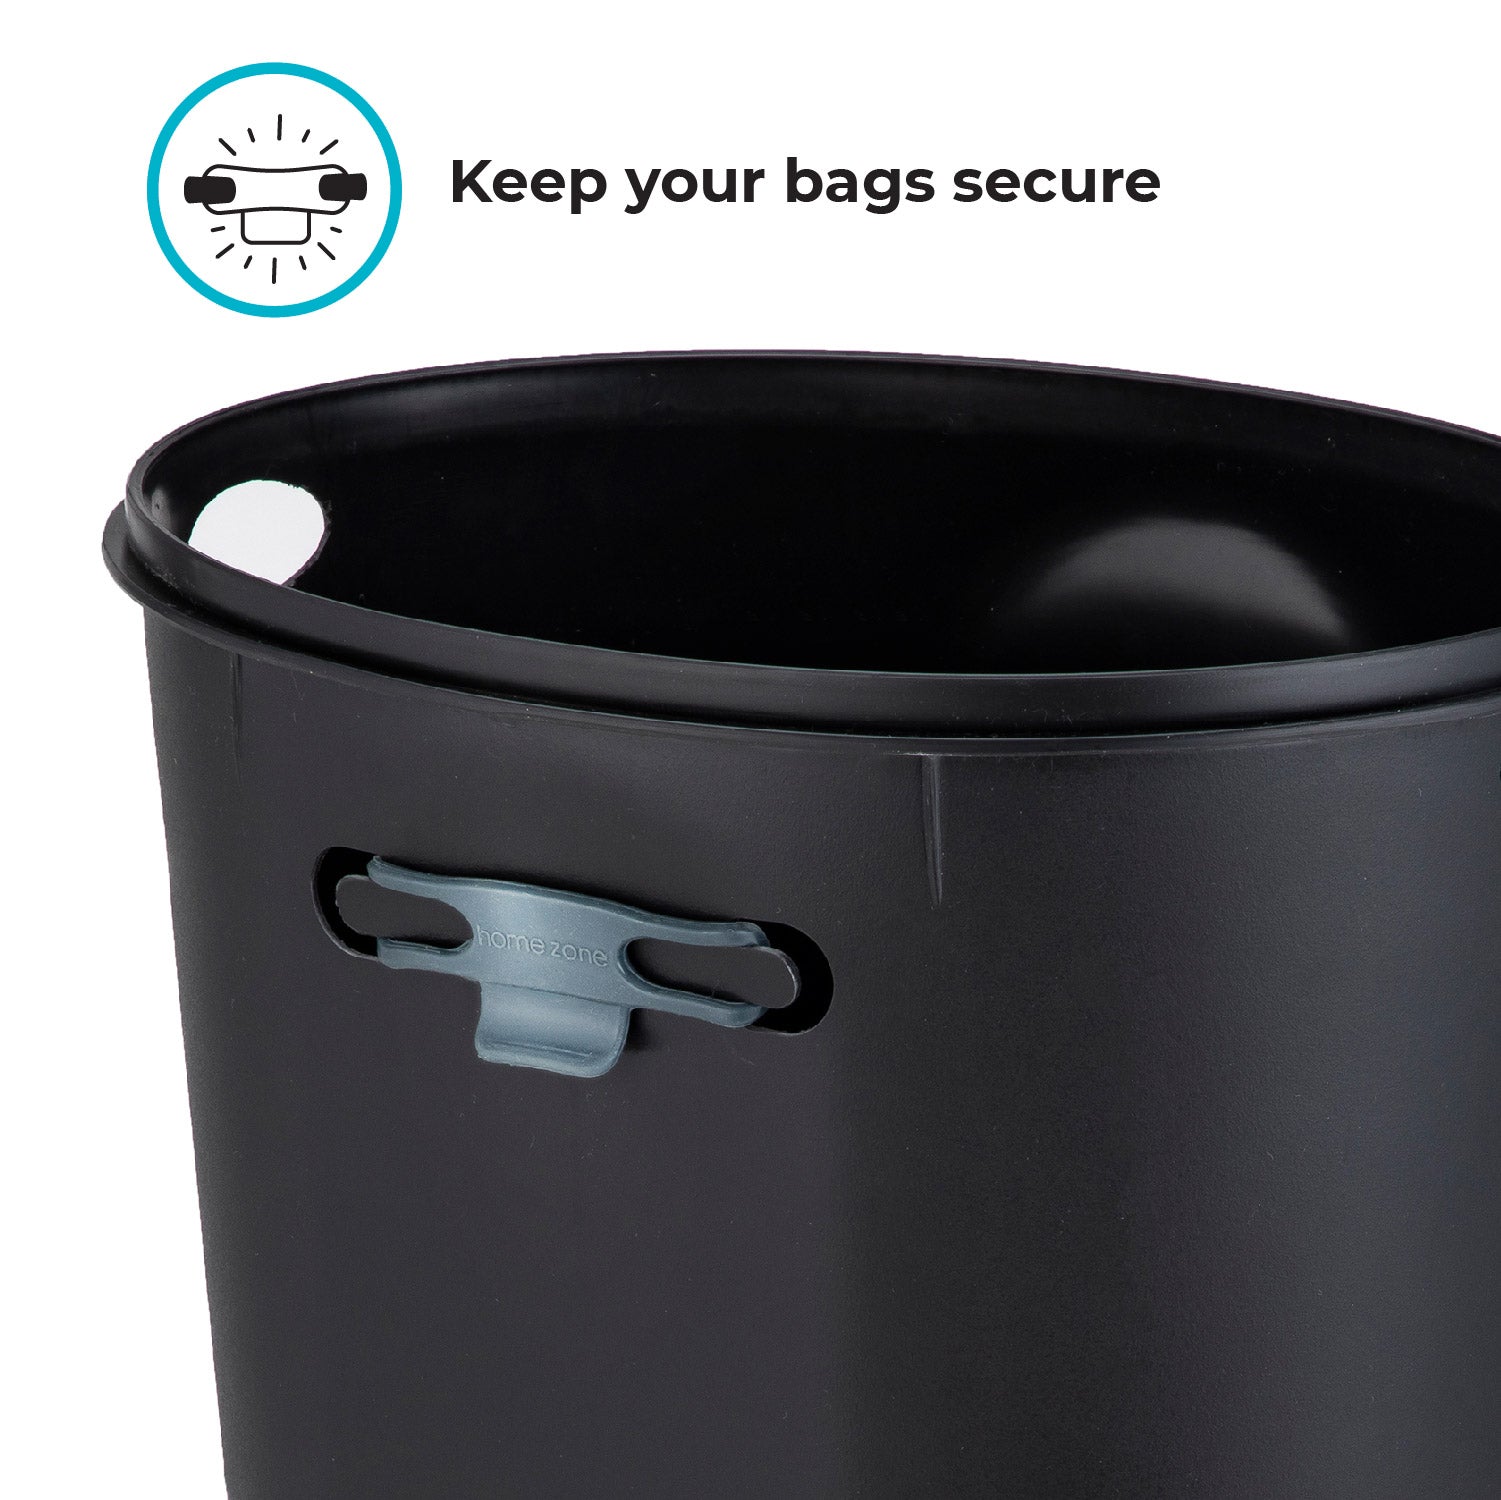 3 Gallon Bathroom Trash Can with Lid - Home Zone Living